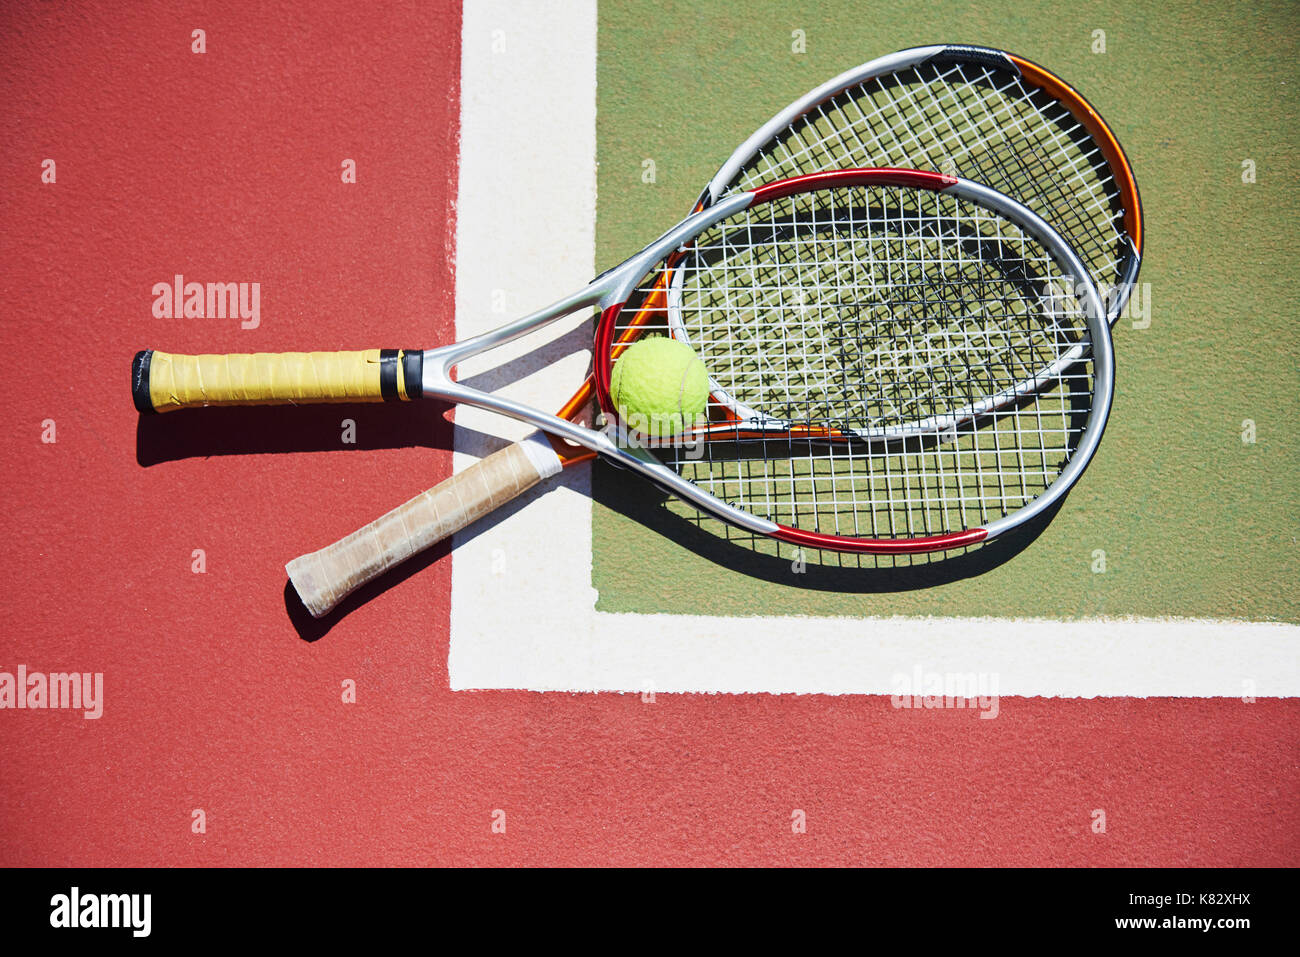 A tennis racket and new tennis ball on a freshly painted tennis court Stock Photo